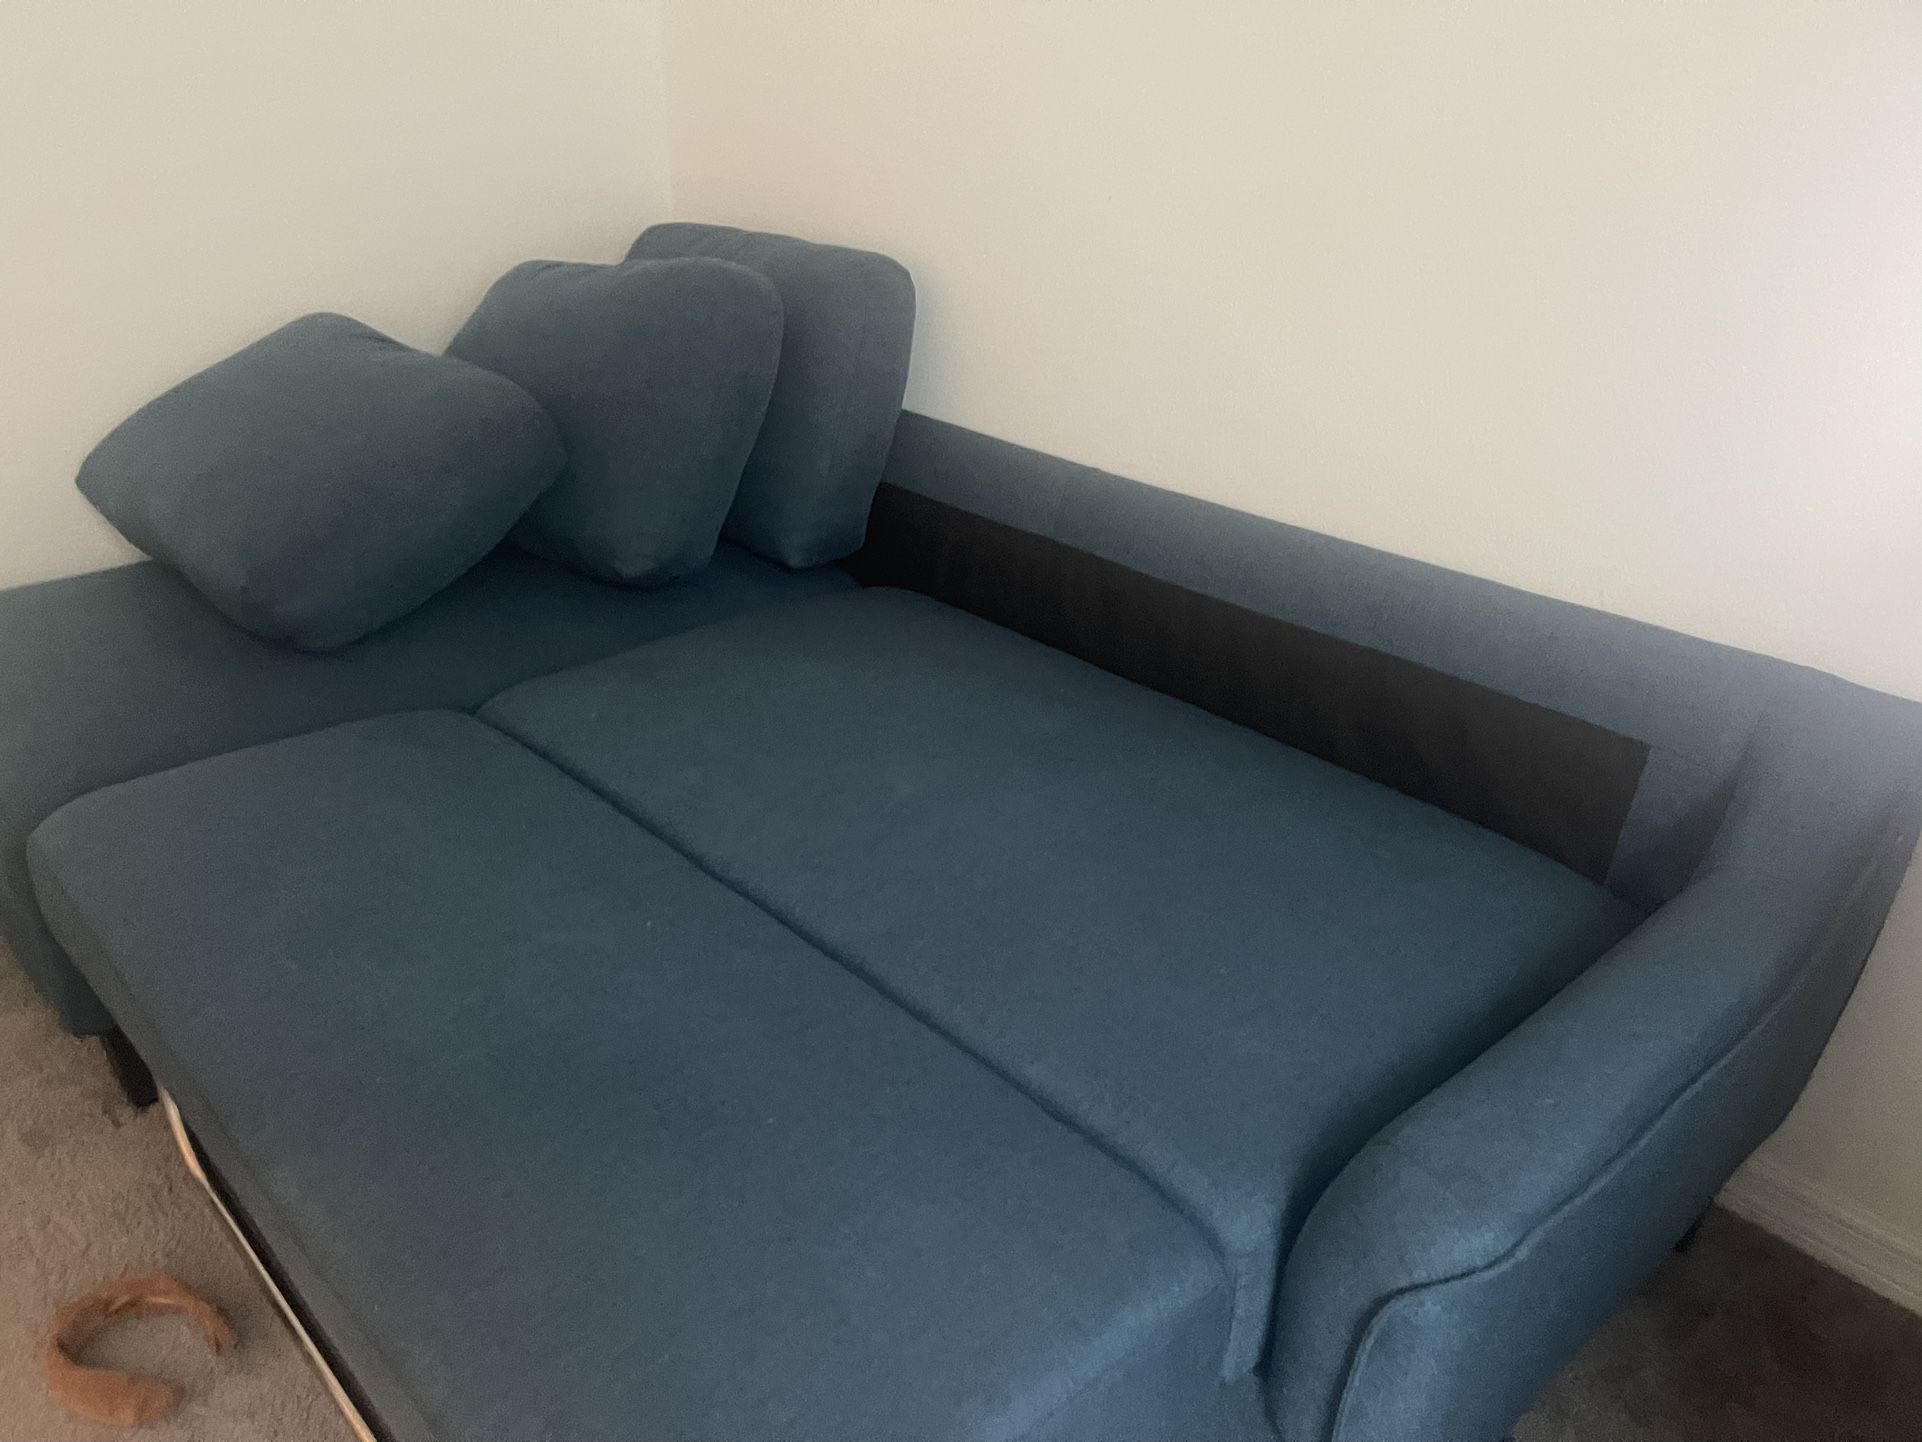 Sleeper Couch For Sale 